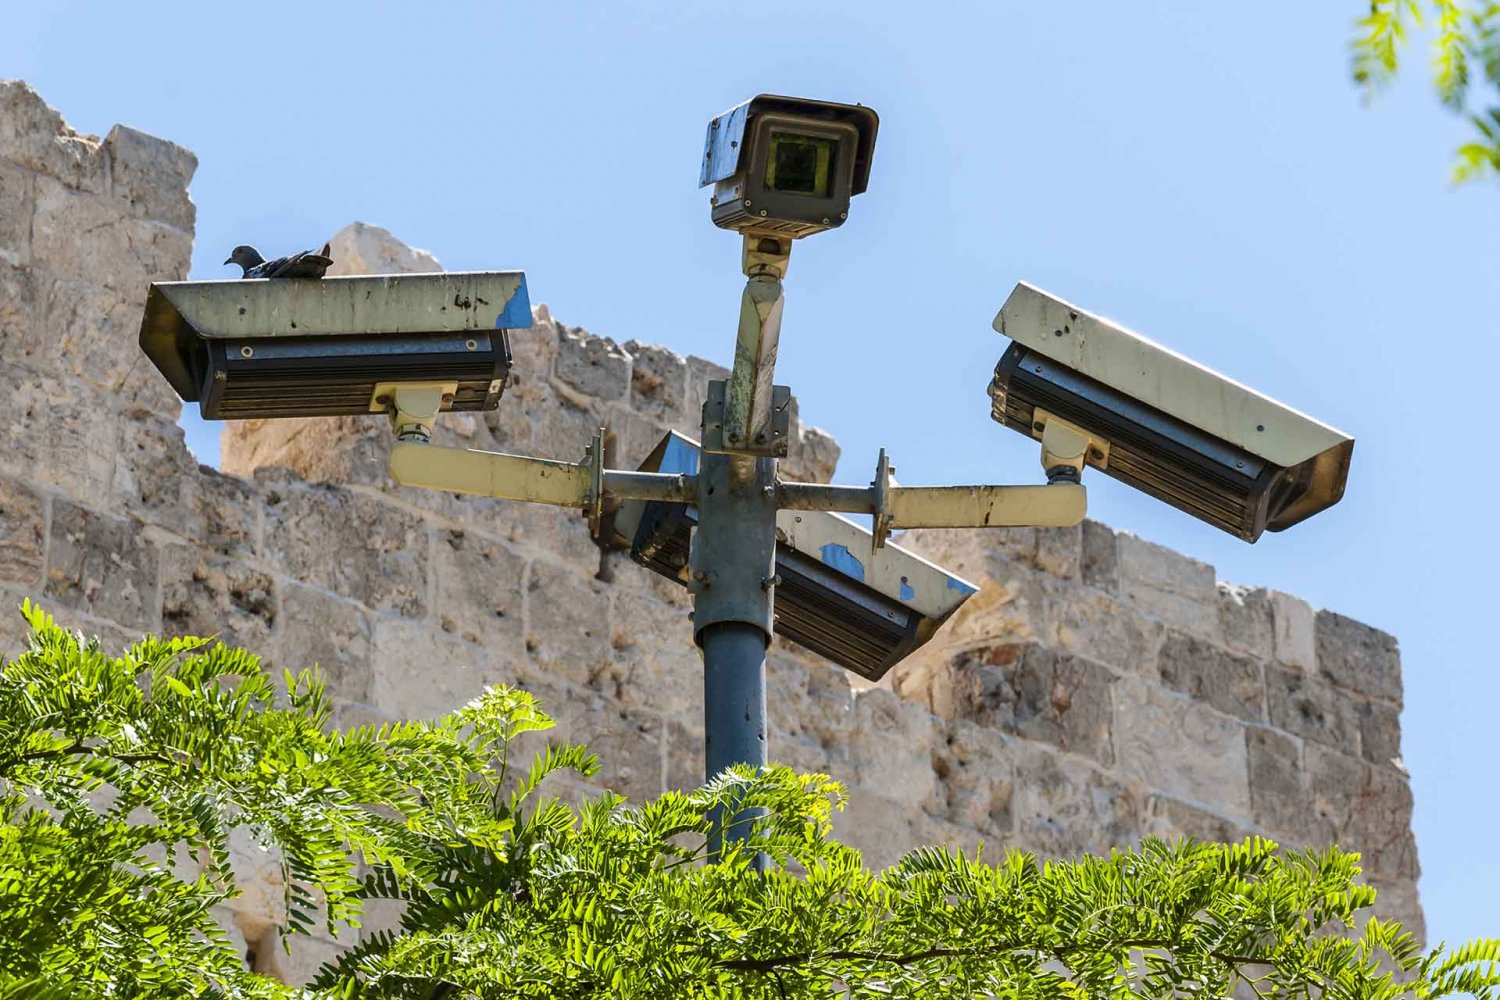 An Israeli security camera conducts facial recognition surveillance in Jerusalem’s Old City.